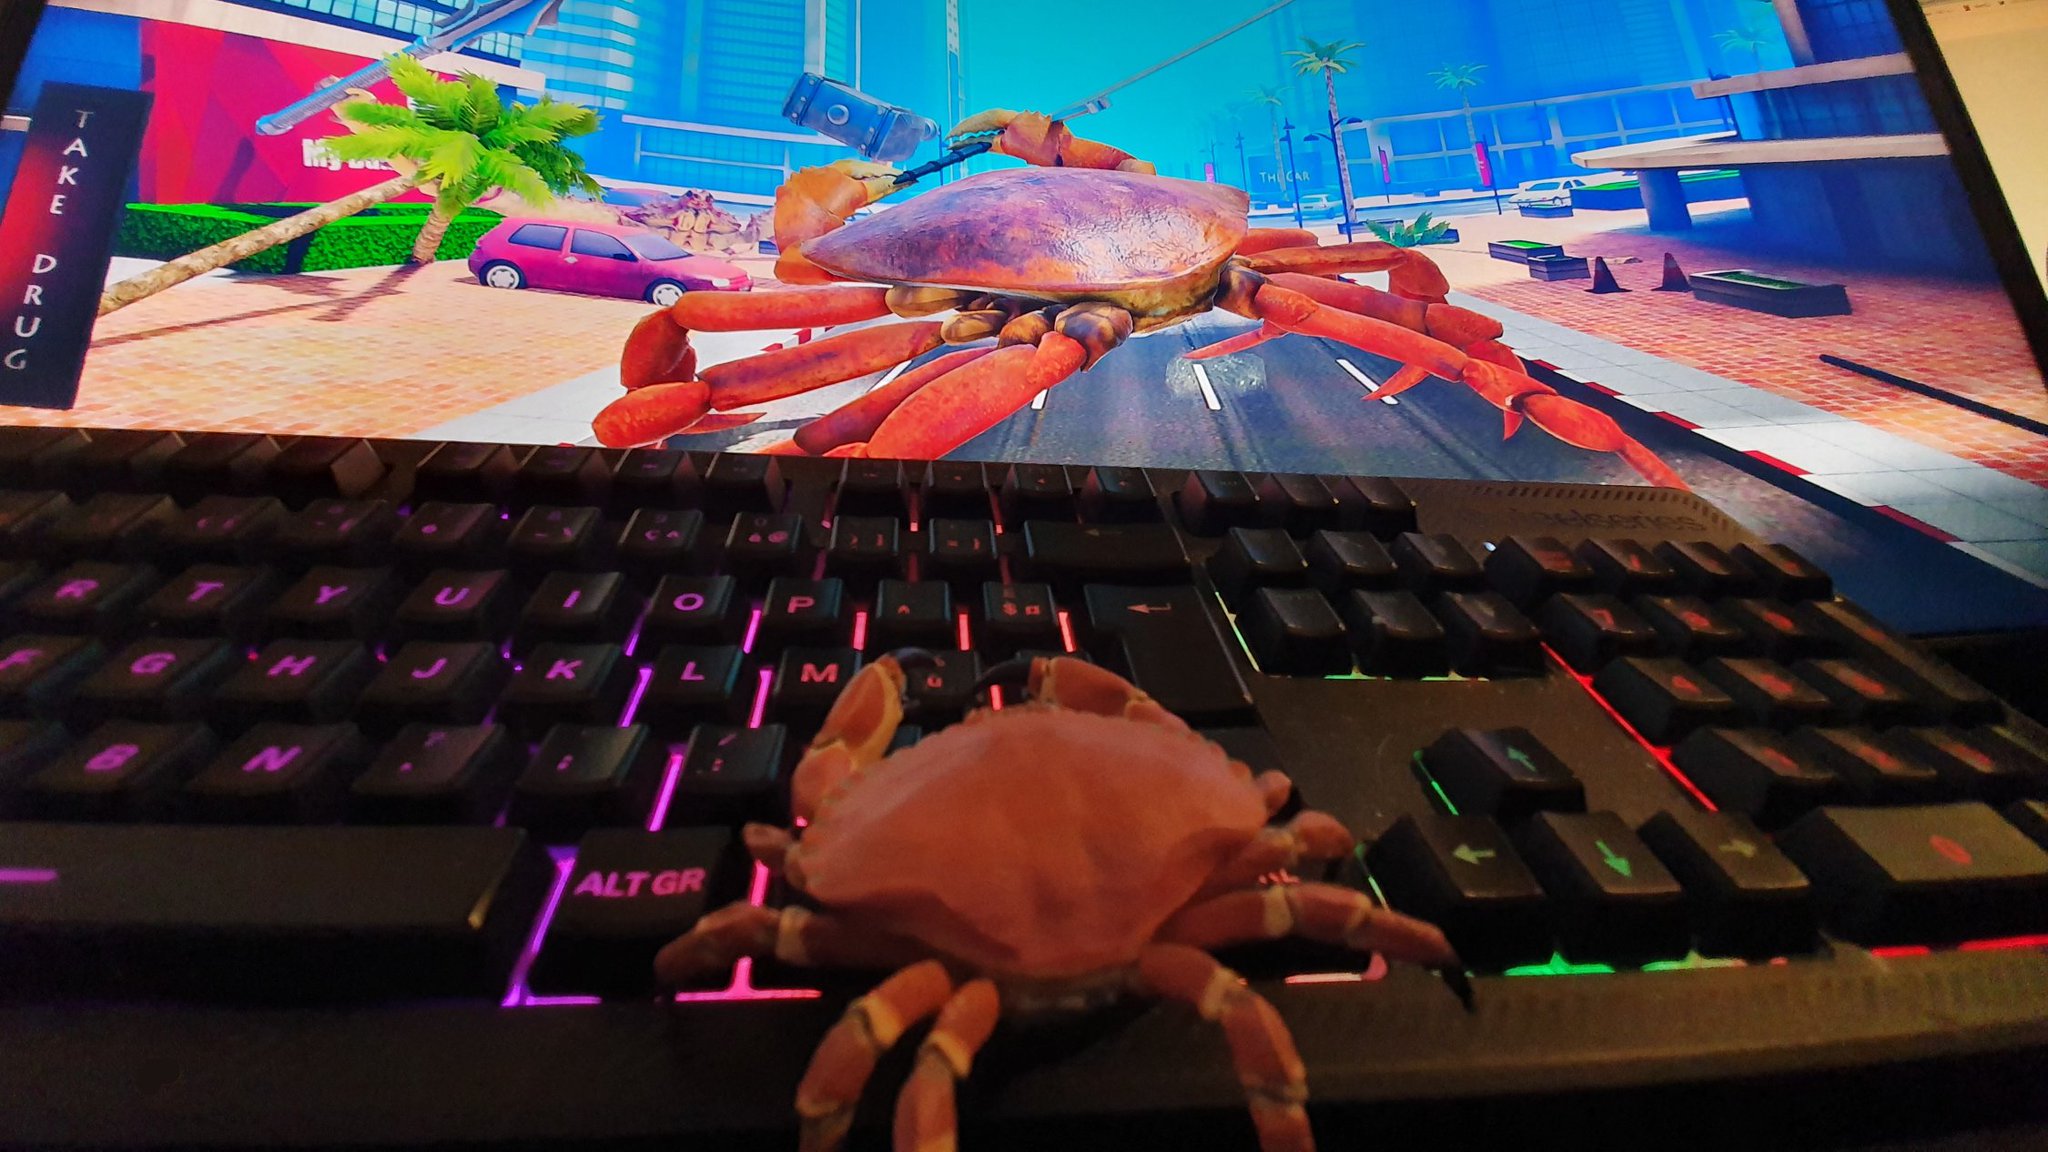 â€œweekly update on my crab: he is playing "Fight Crab"